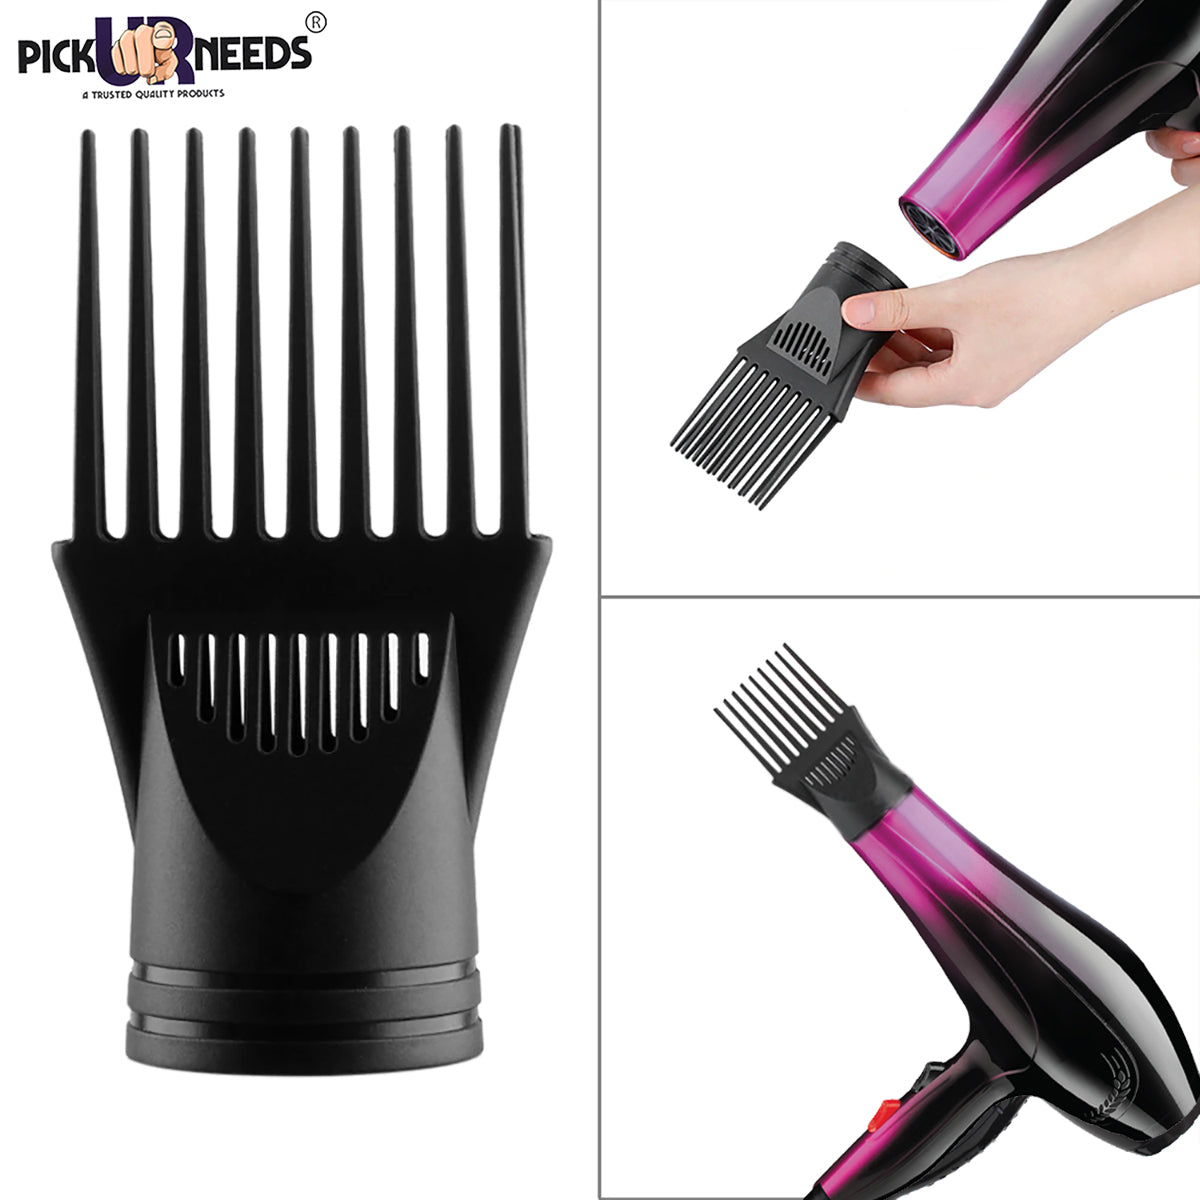 Pick Ur Needs Professional Stylish Hair Dryers For Women & Men Hot And Cold Dryer With Comb Reducer (3500 Watt)